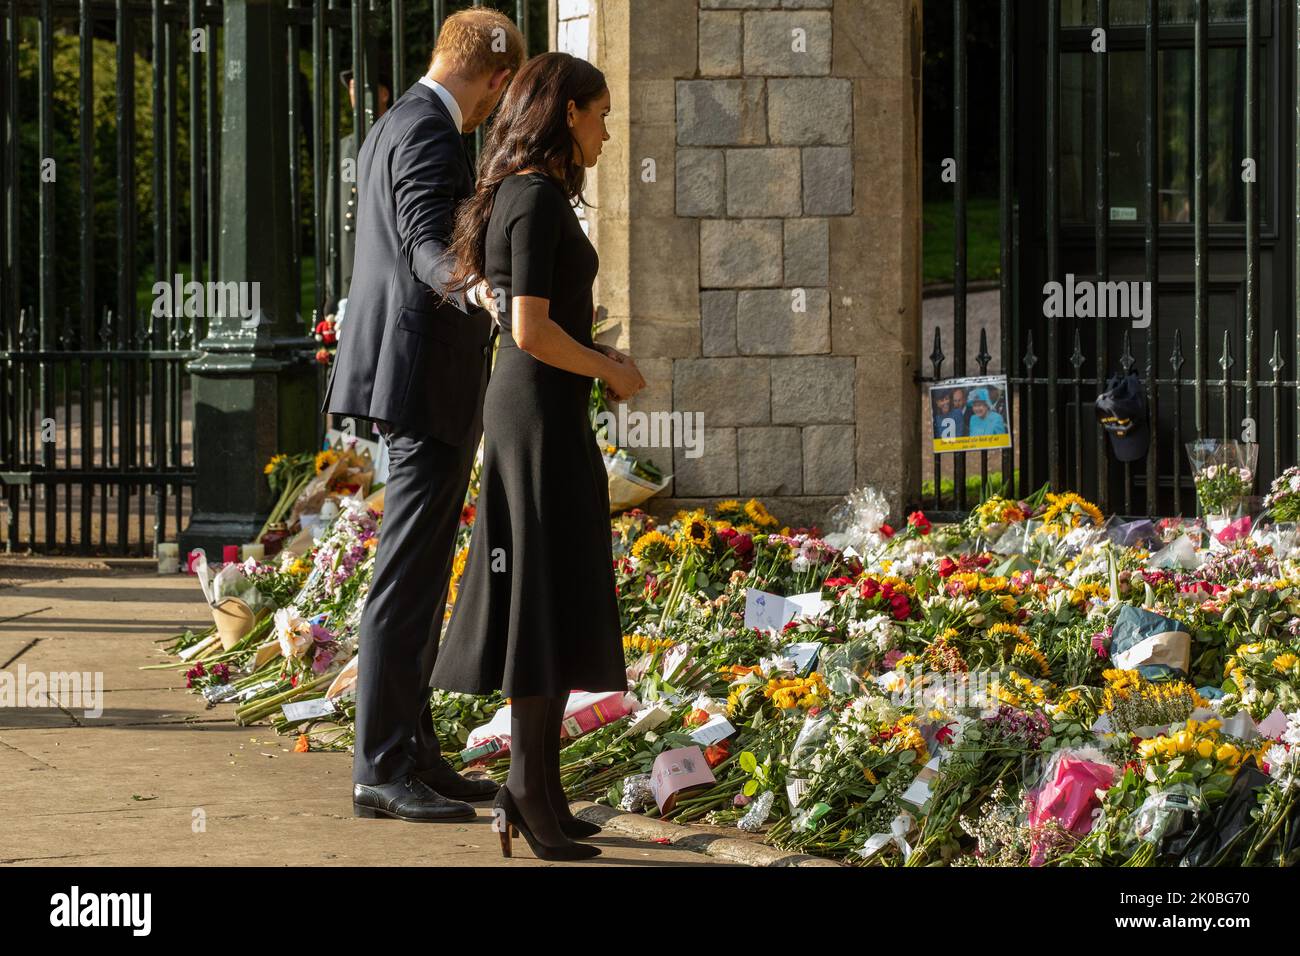 Windsor, UK. 10th September, 2022. Prince Harry and Meghan, the Duke and Duchess of Sussex, view floral tributes laid outside Cambridge Gate at Windsor Castle following the death of Queen Elizabeth II. Queen Elizabeth II, the UK's longest-serving monarch, died at Balmoral aged 96 on 8th September 2022 after a reign lasting 70 years. Credit: Mark Kerrison/Alamy Live News Stock Photo